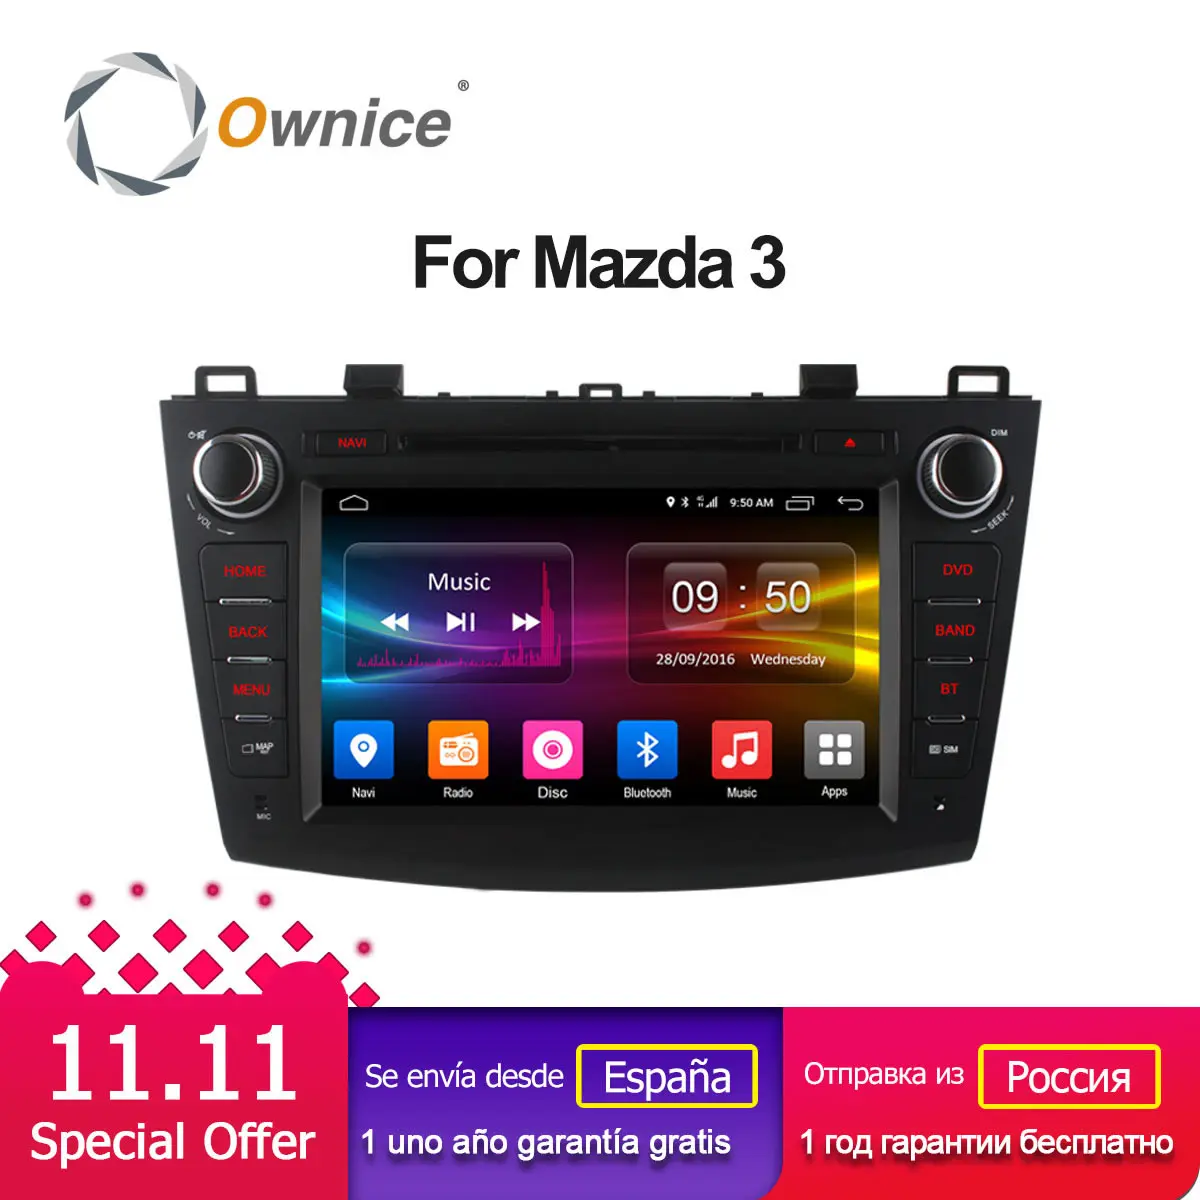 Sale Ownice C500 Android 6.0 Octa 8 core for mazda 3 Car DVD player 2009-2012 radio with wifi 2GB RAM 32GB ROM Support 4G LTE DAB+ 0